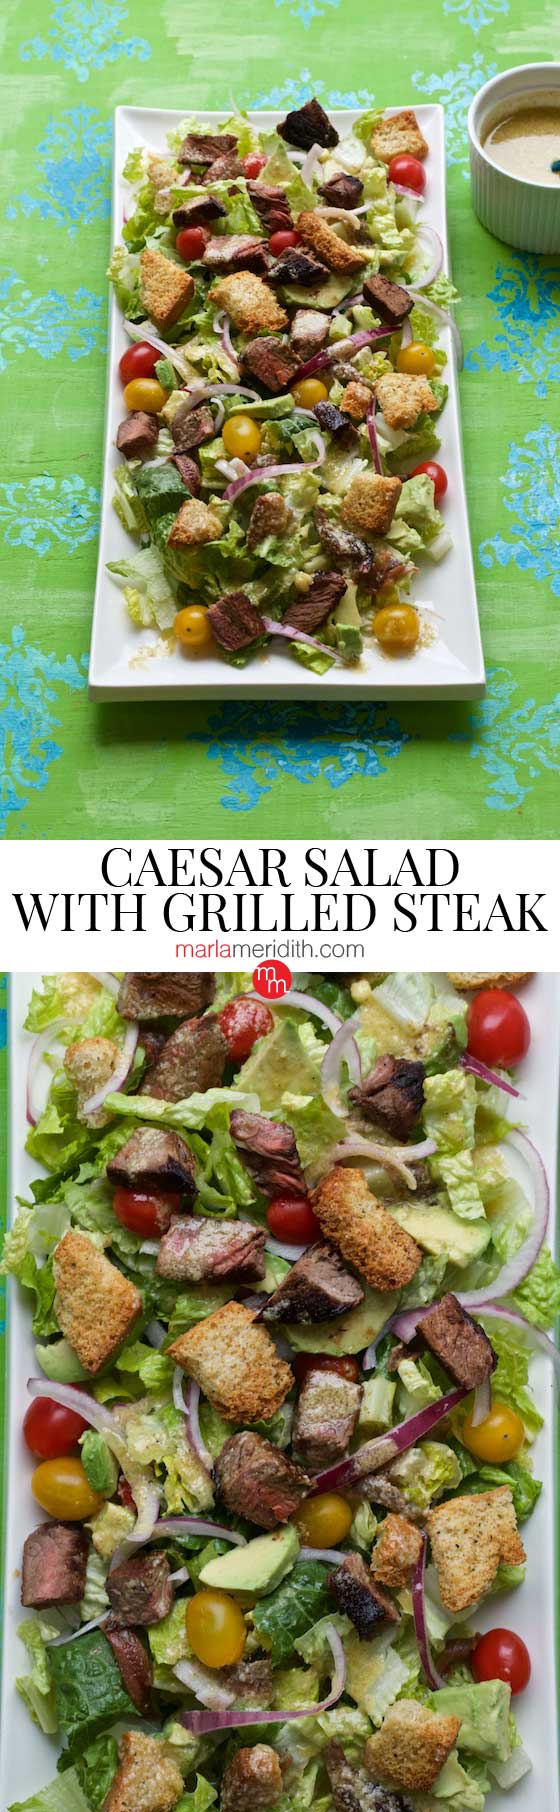 Fall in love with this delish Caesar Salad with Grilled Steak recipe on MarlaMeridith.com #recipe #salad